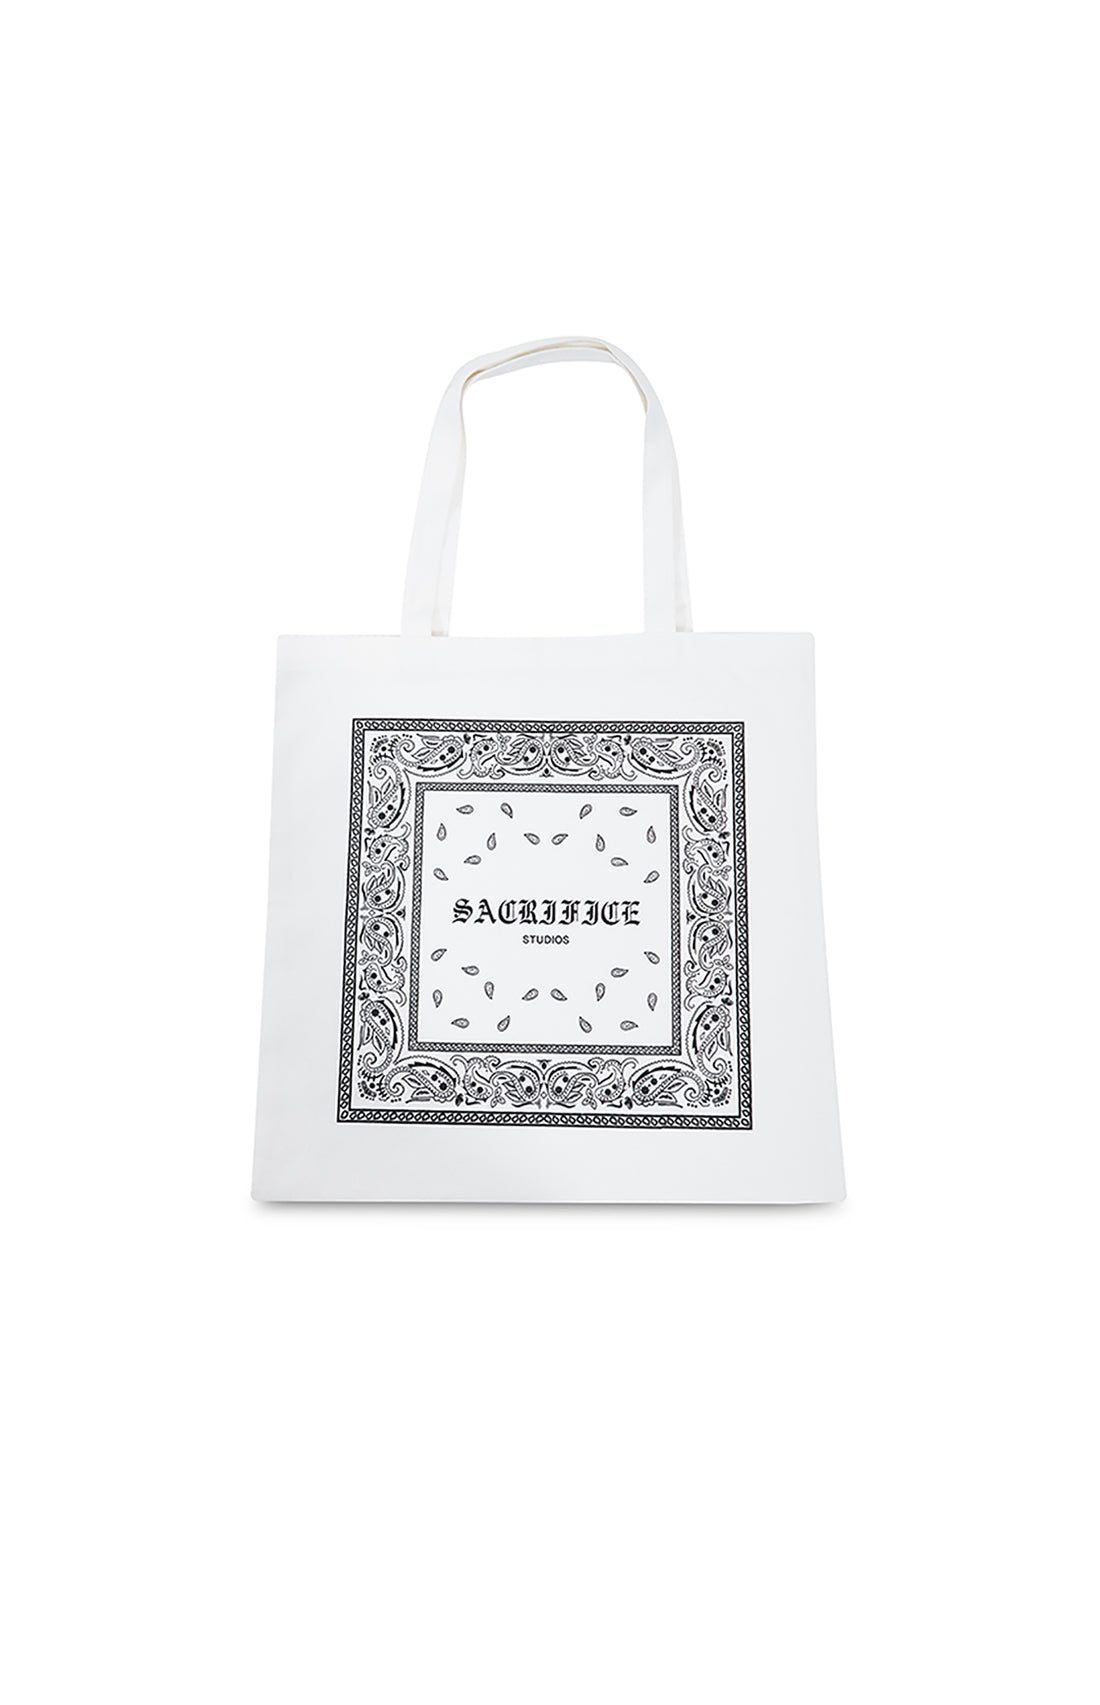 Premium bandana  tote bag featuring a bold white graphic print. Expertly crafted in Portugal. Located in Dubai. 